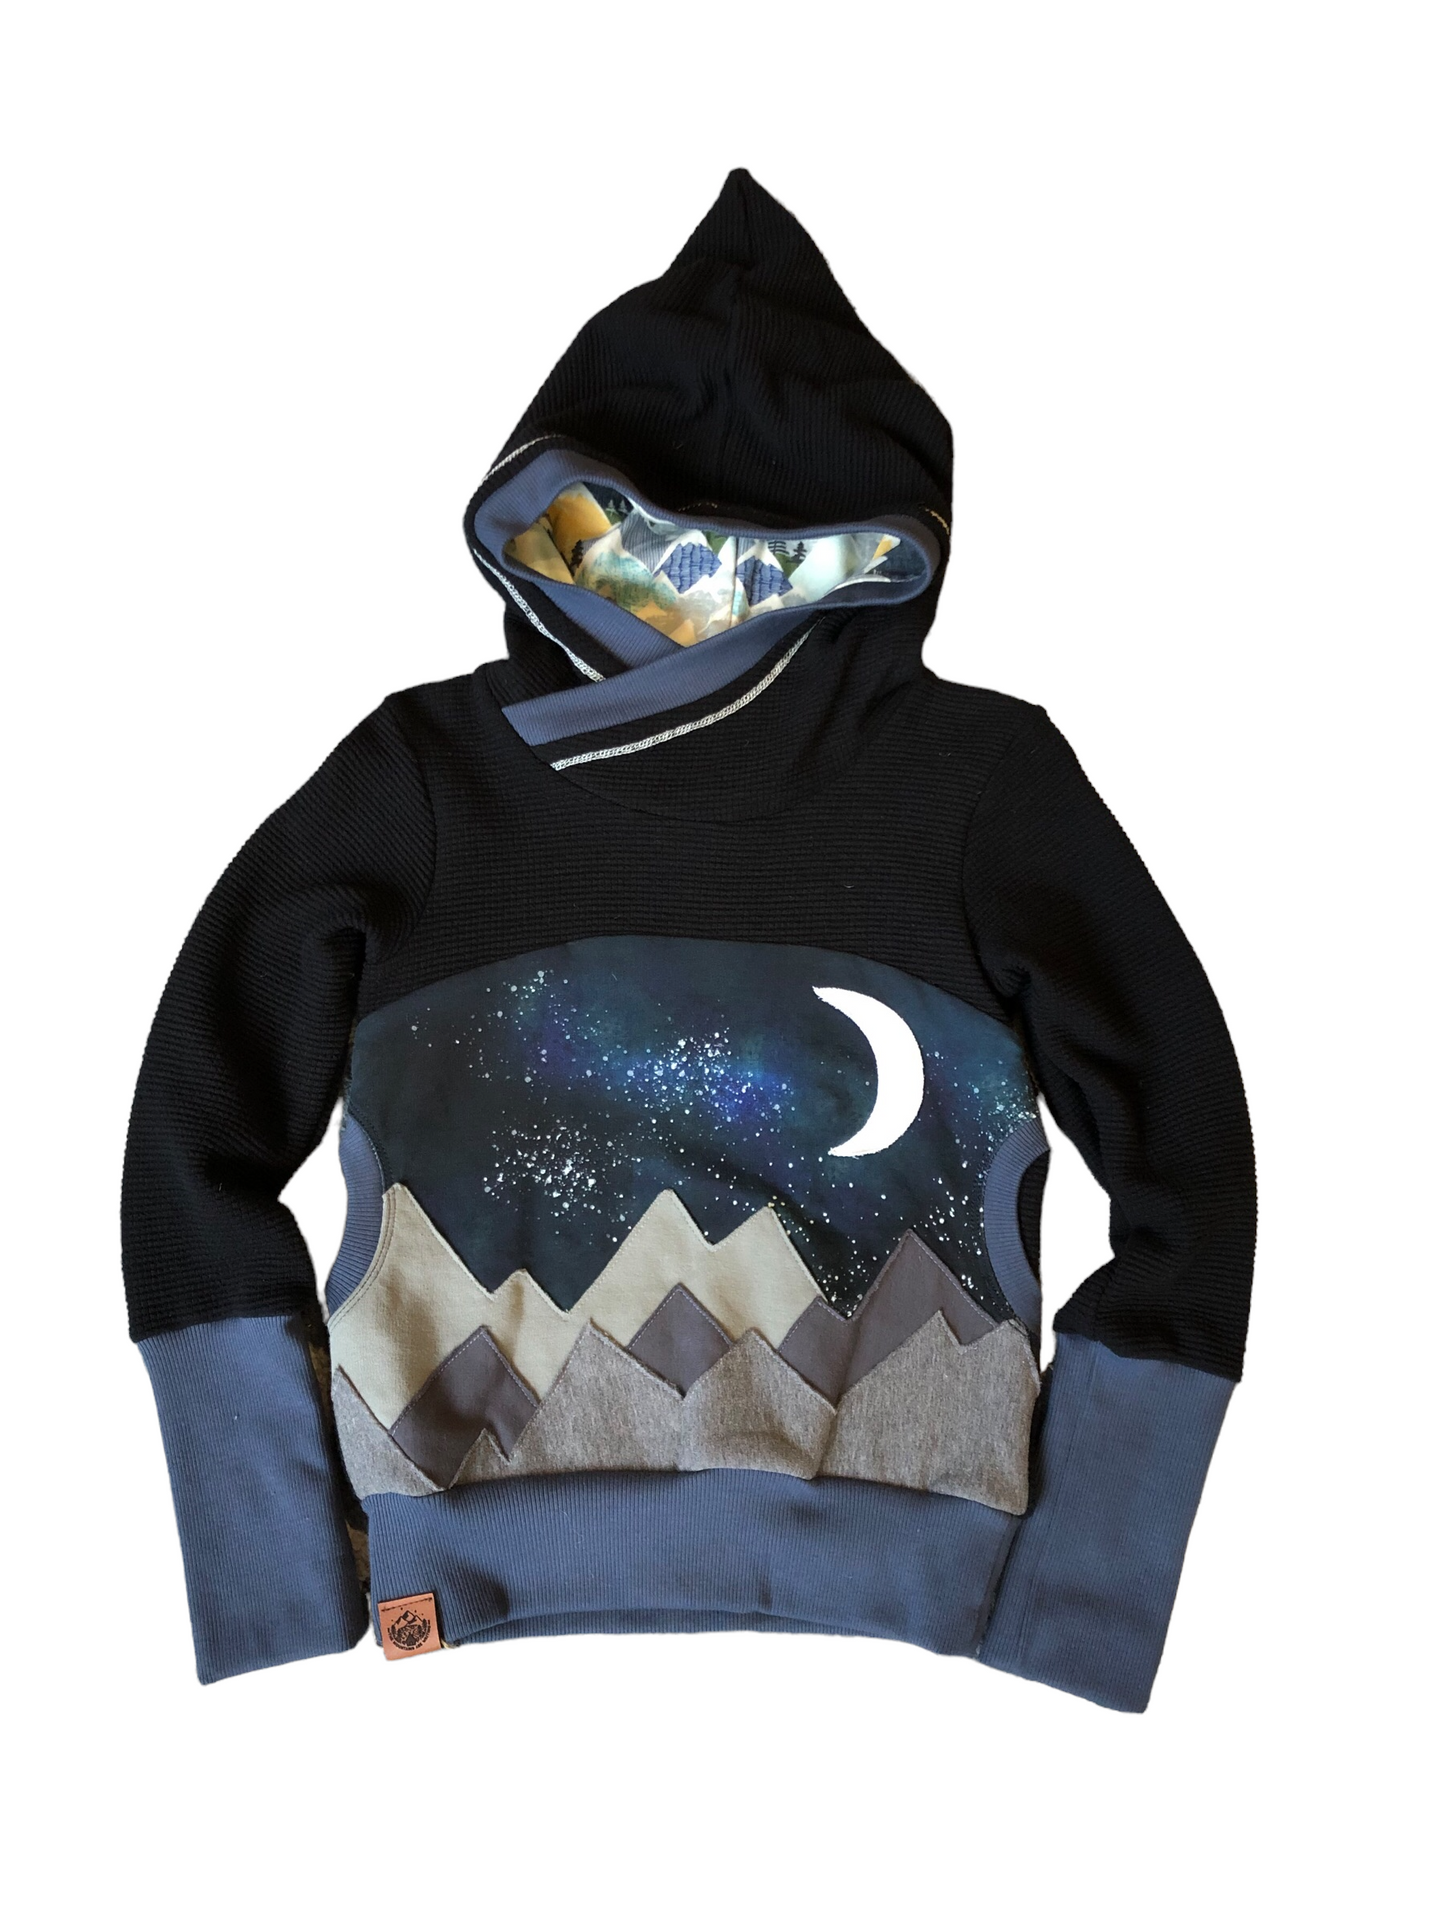 SOME Threads - Kids Moonlight Mountains on Black Waffle Hoodie